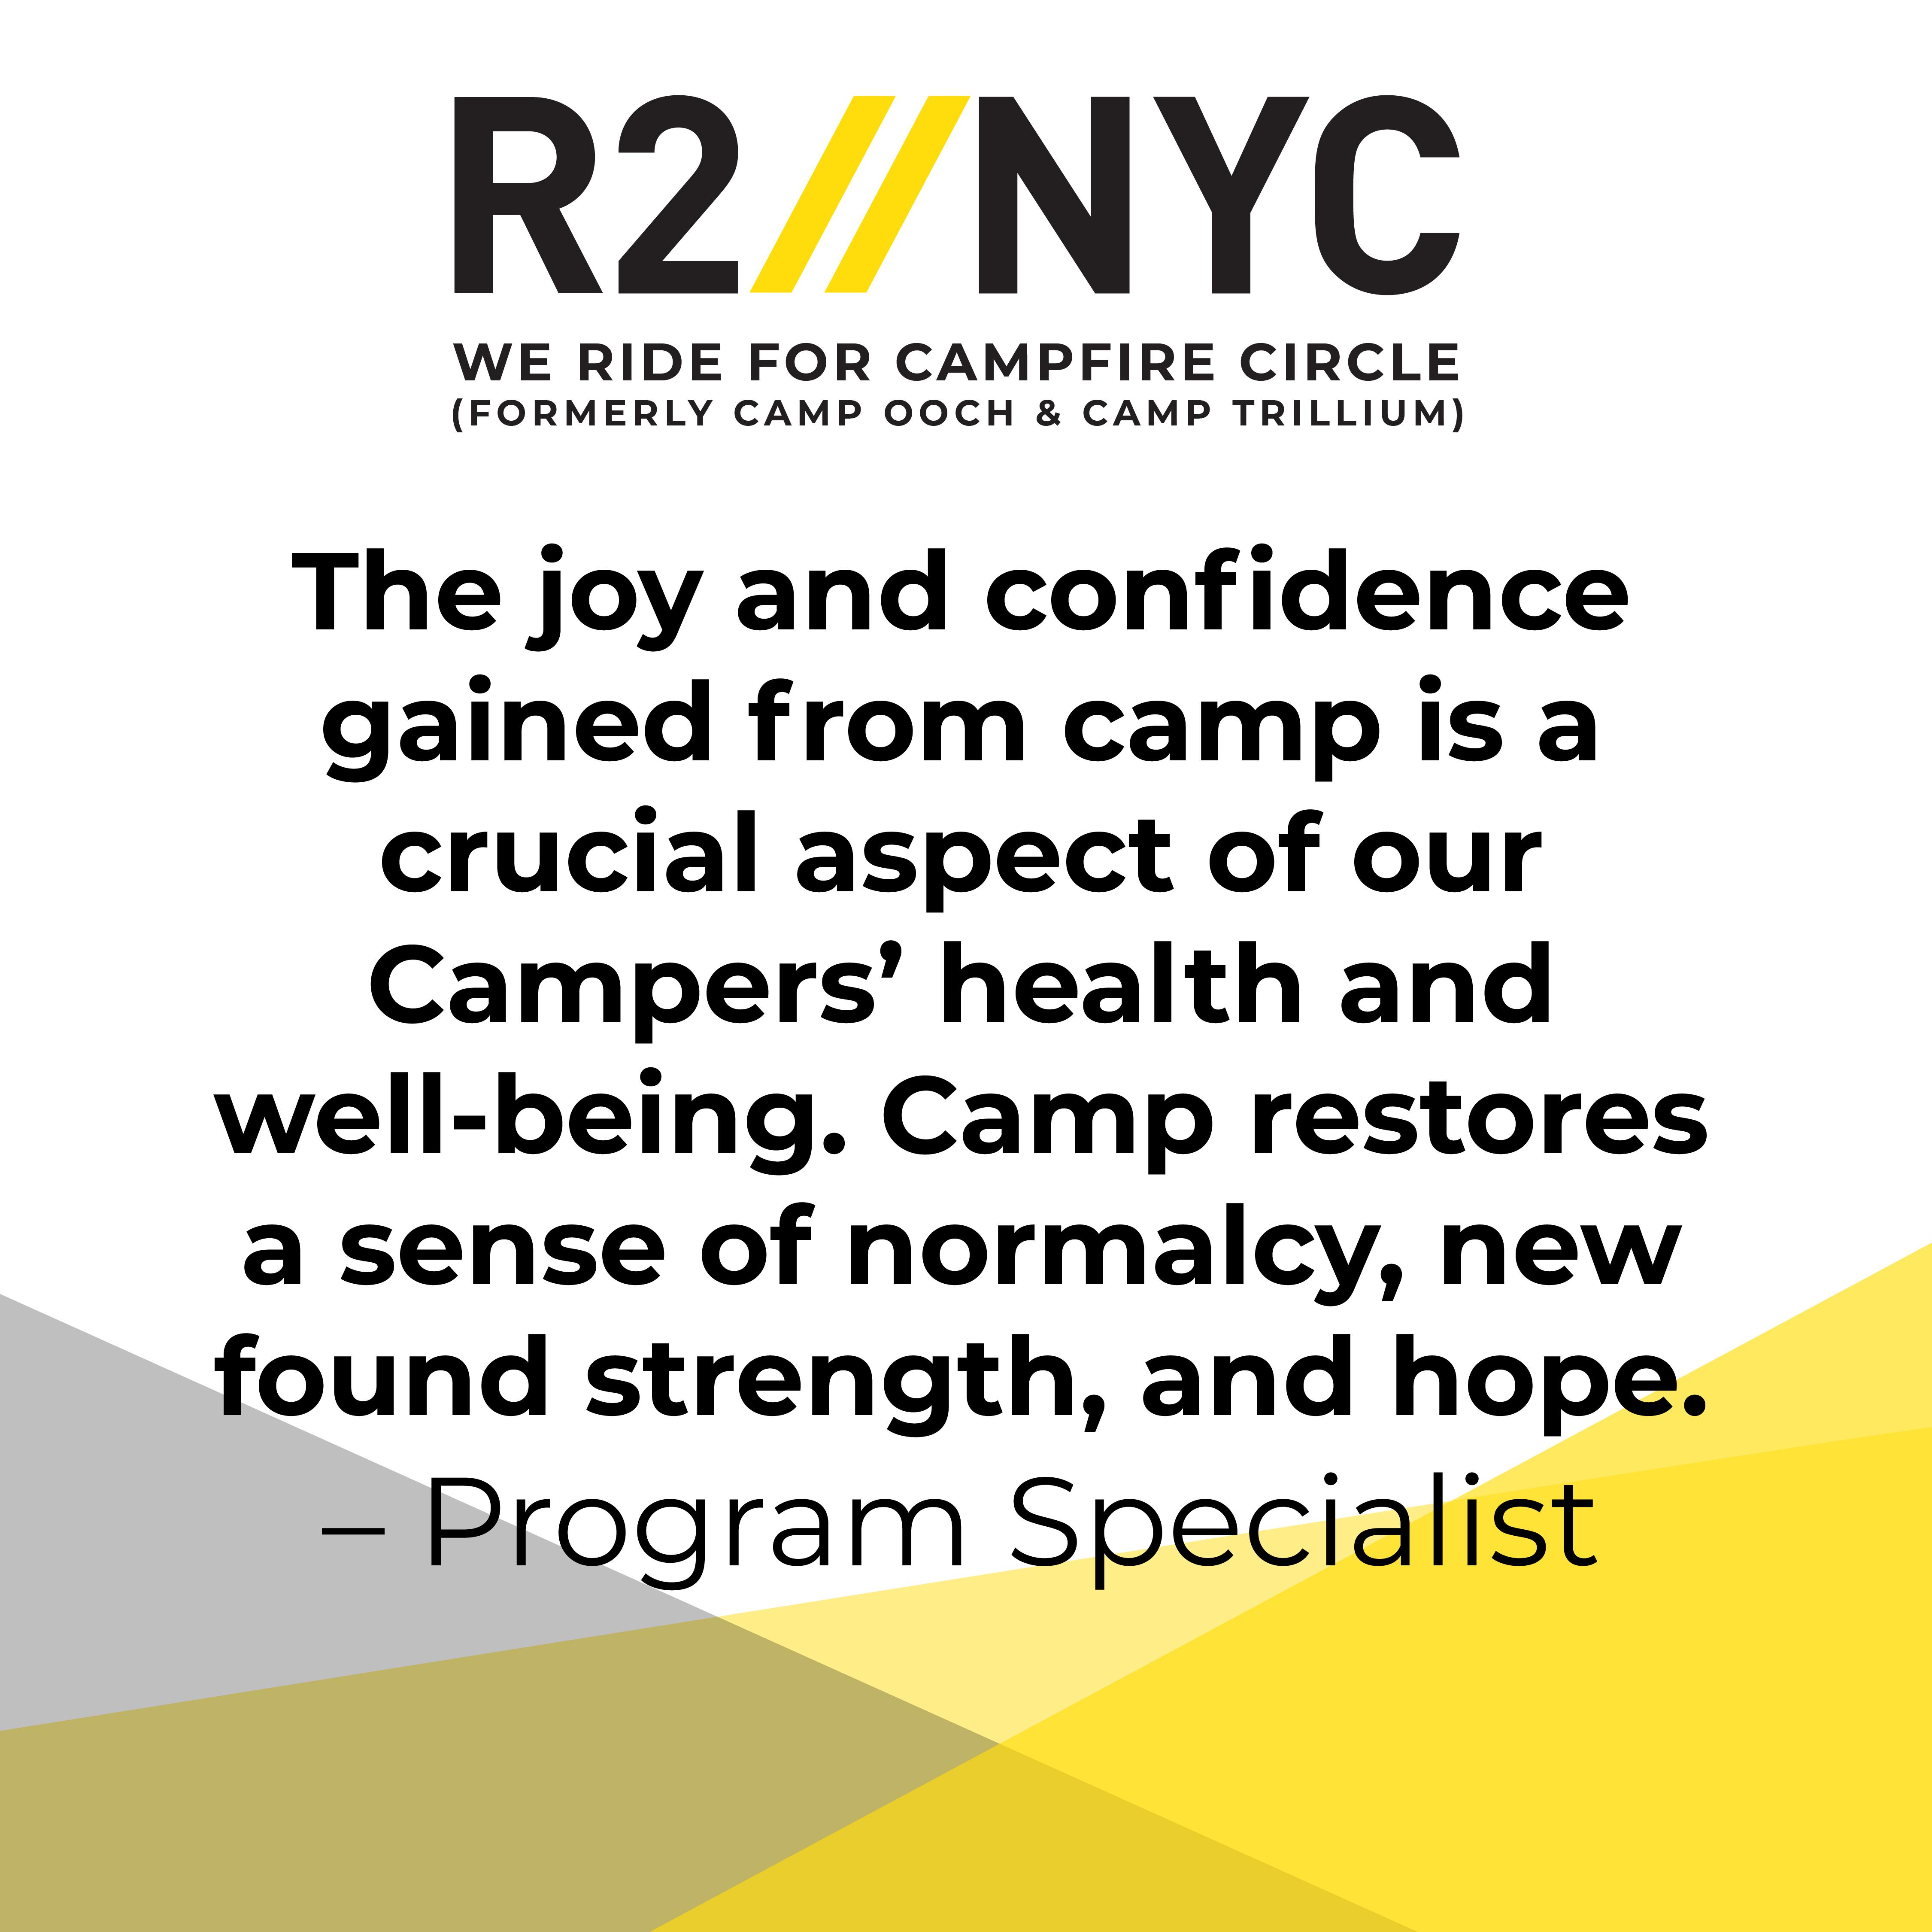 The joy and confidence gained from camp is a crucial aspect of our Campers' health and well-being. Camp restores a sense of normalcy, new found strength, and hope. Program Specialist